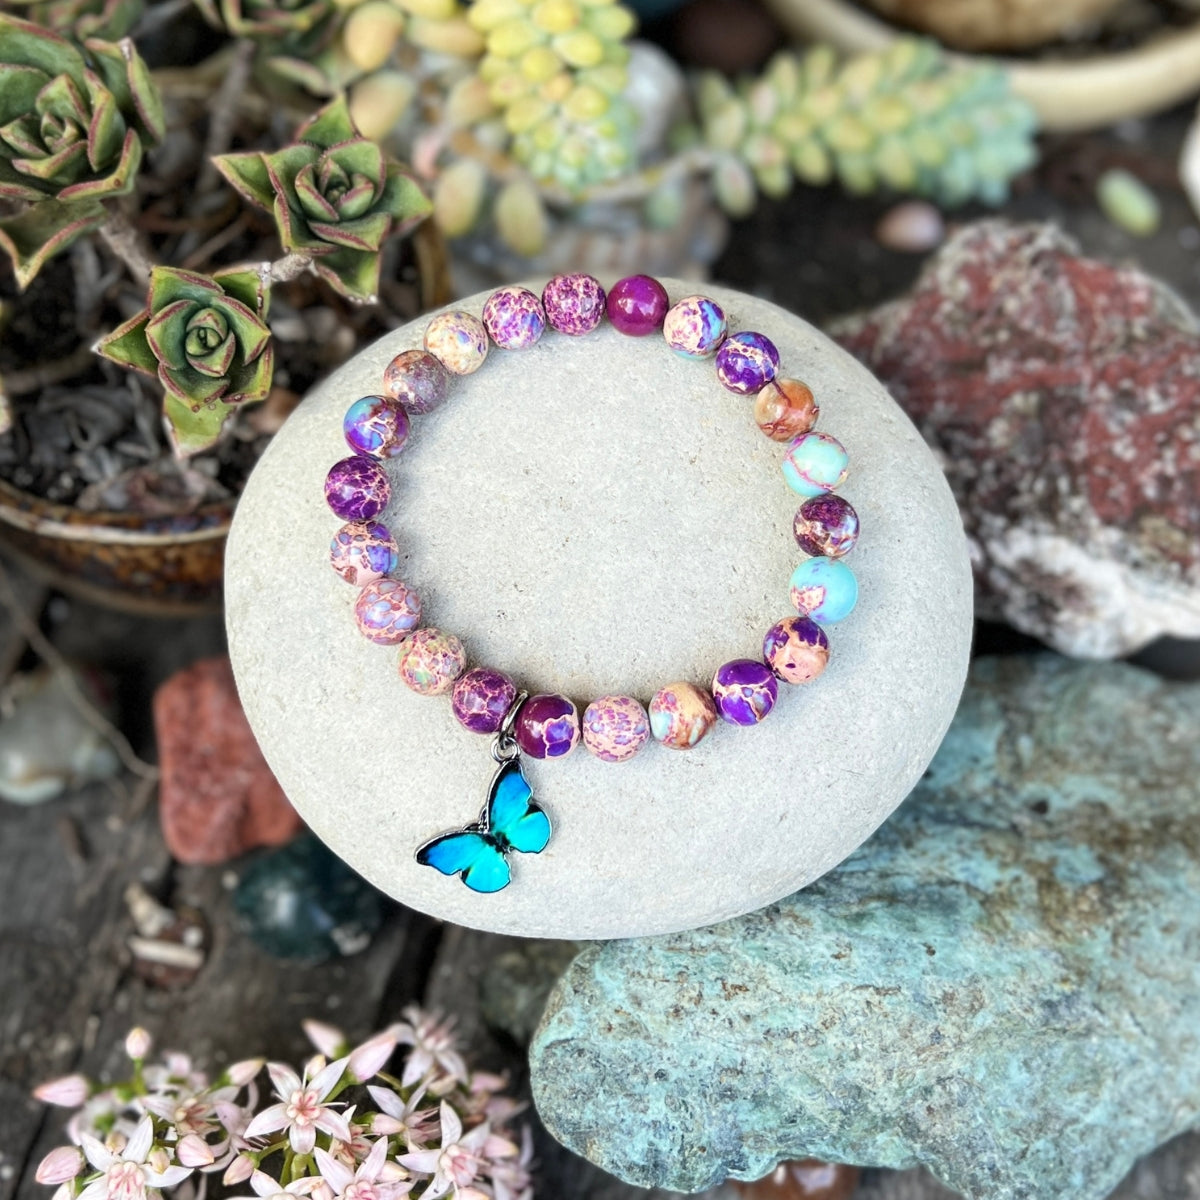 Let the "Joyful Butterfly Dance Jewelry Set" be your mindful companions, encouraging you to dance through life with the carefree spirit of a butterfly.